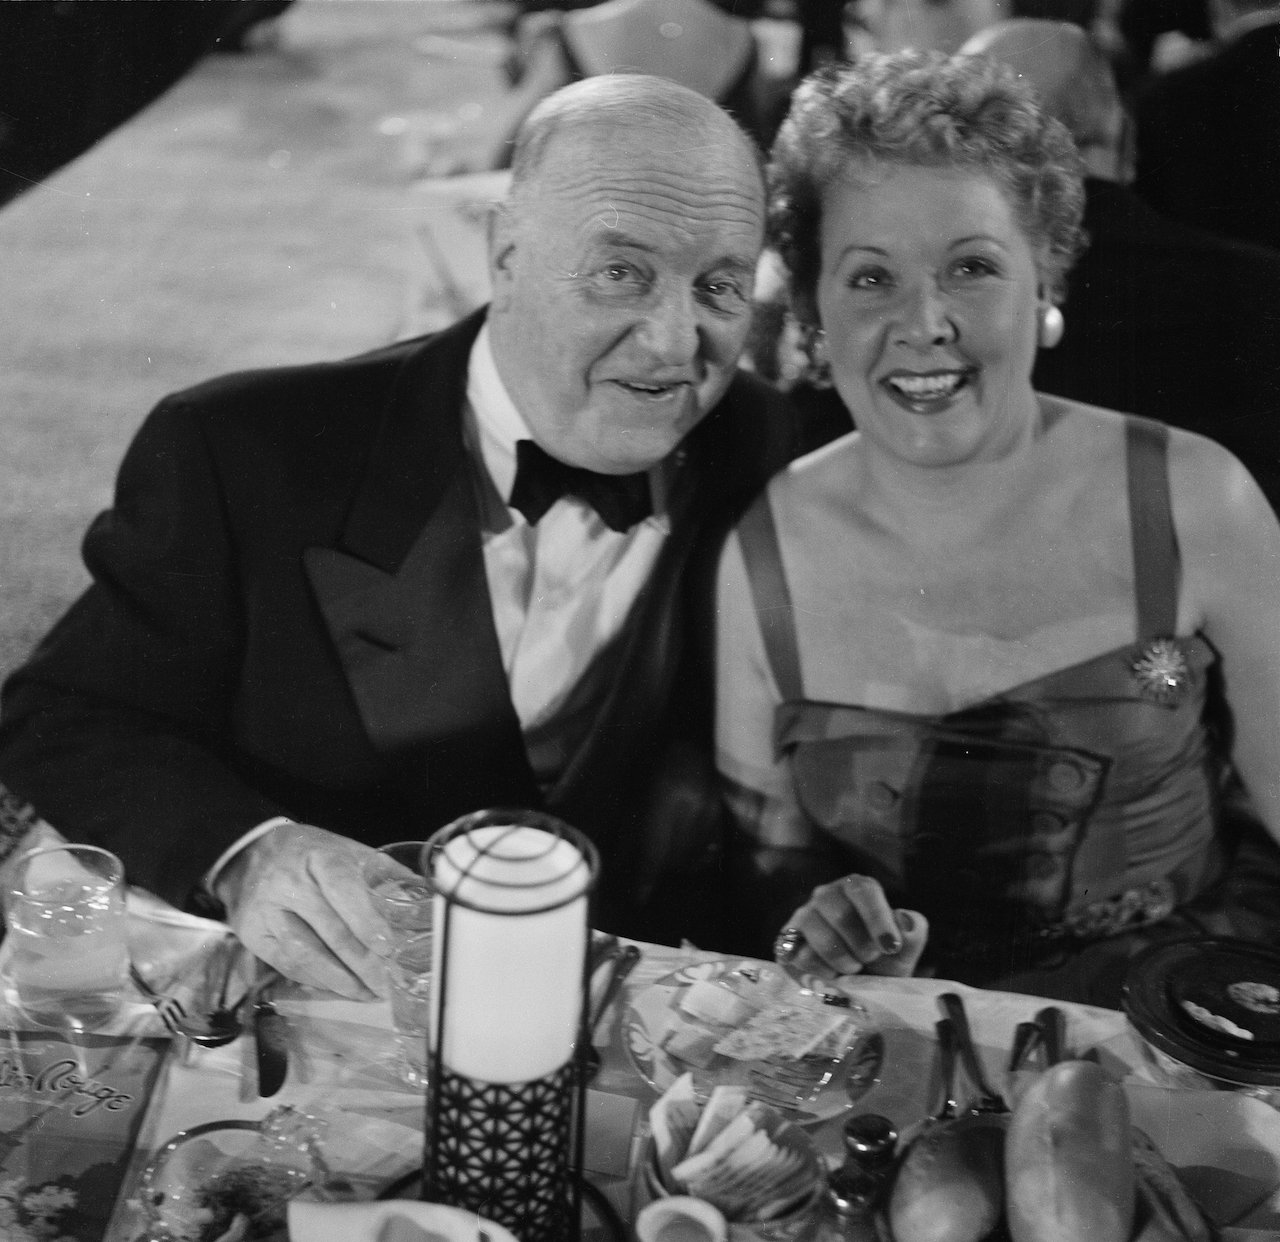 'I Love Lucy' actress  Vivian Vance poses with co star William Frawley during the Emmy Awards 